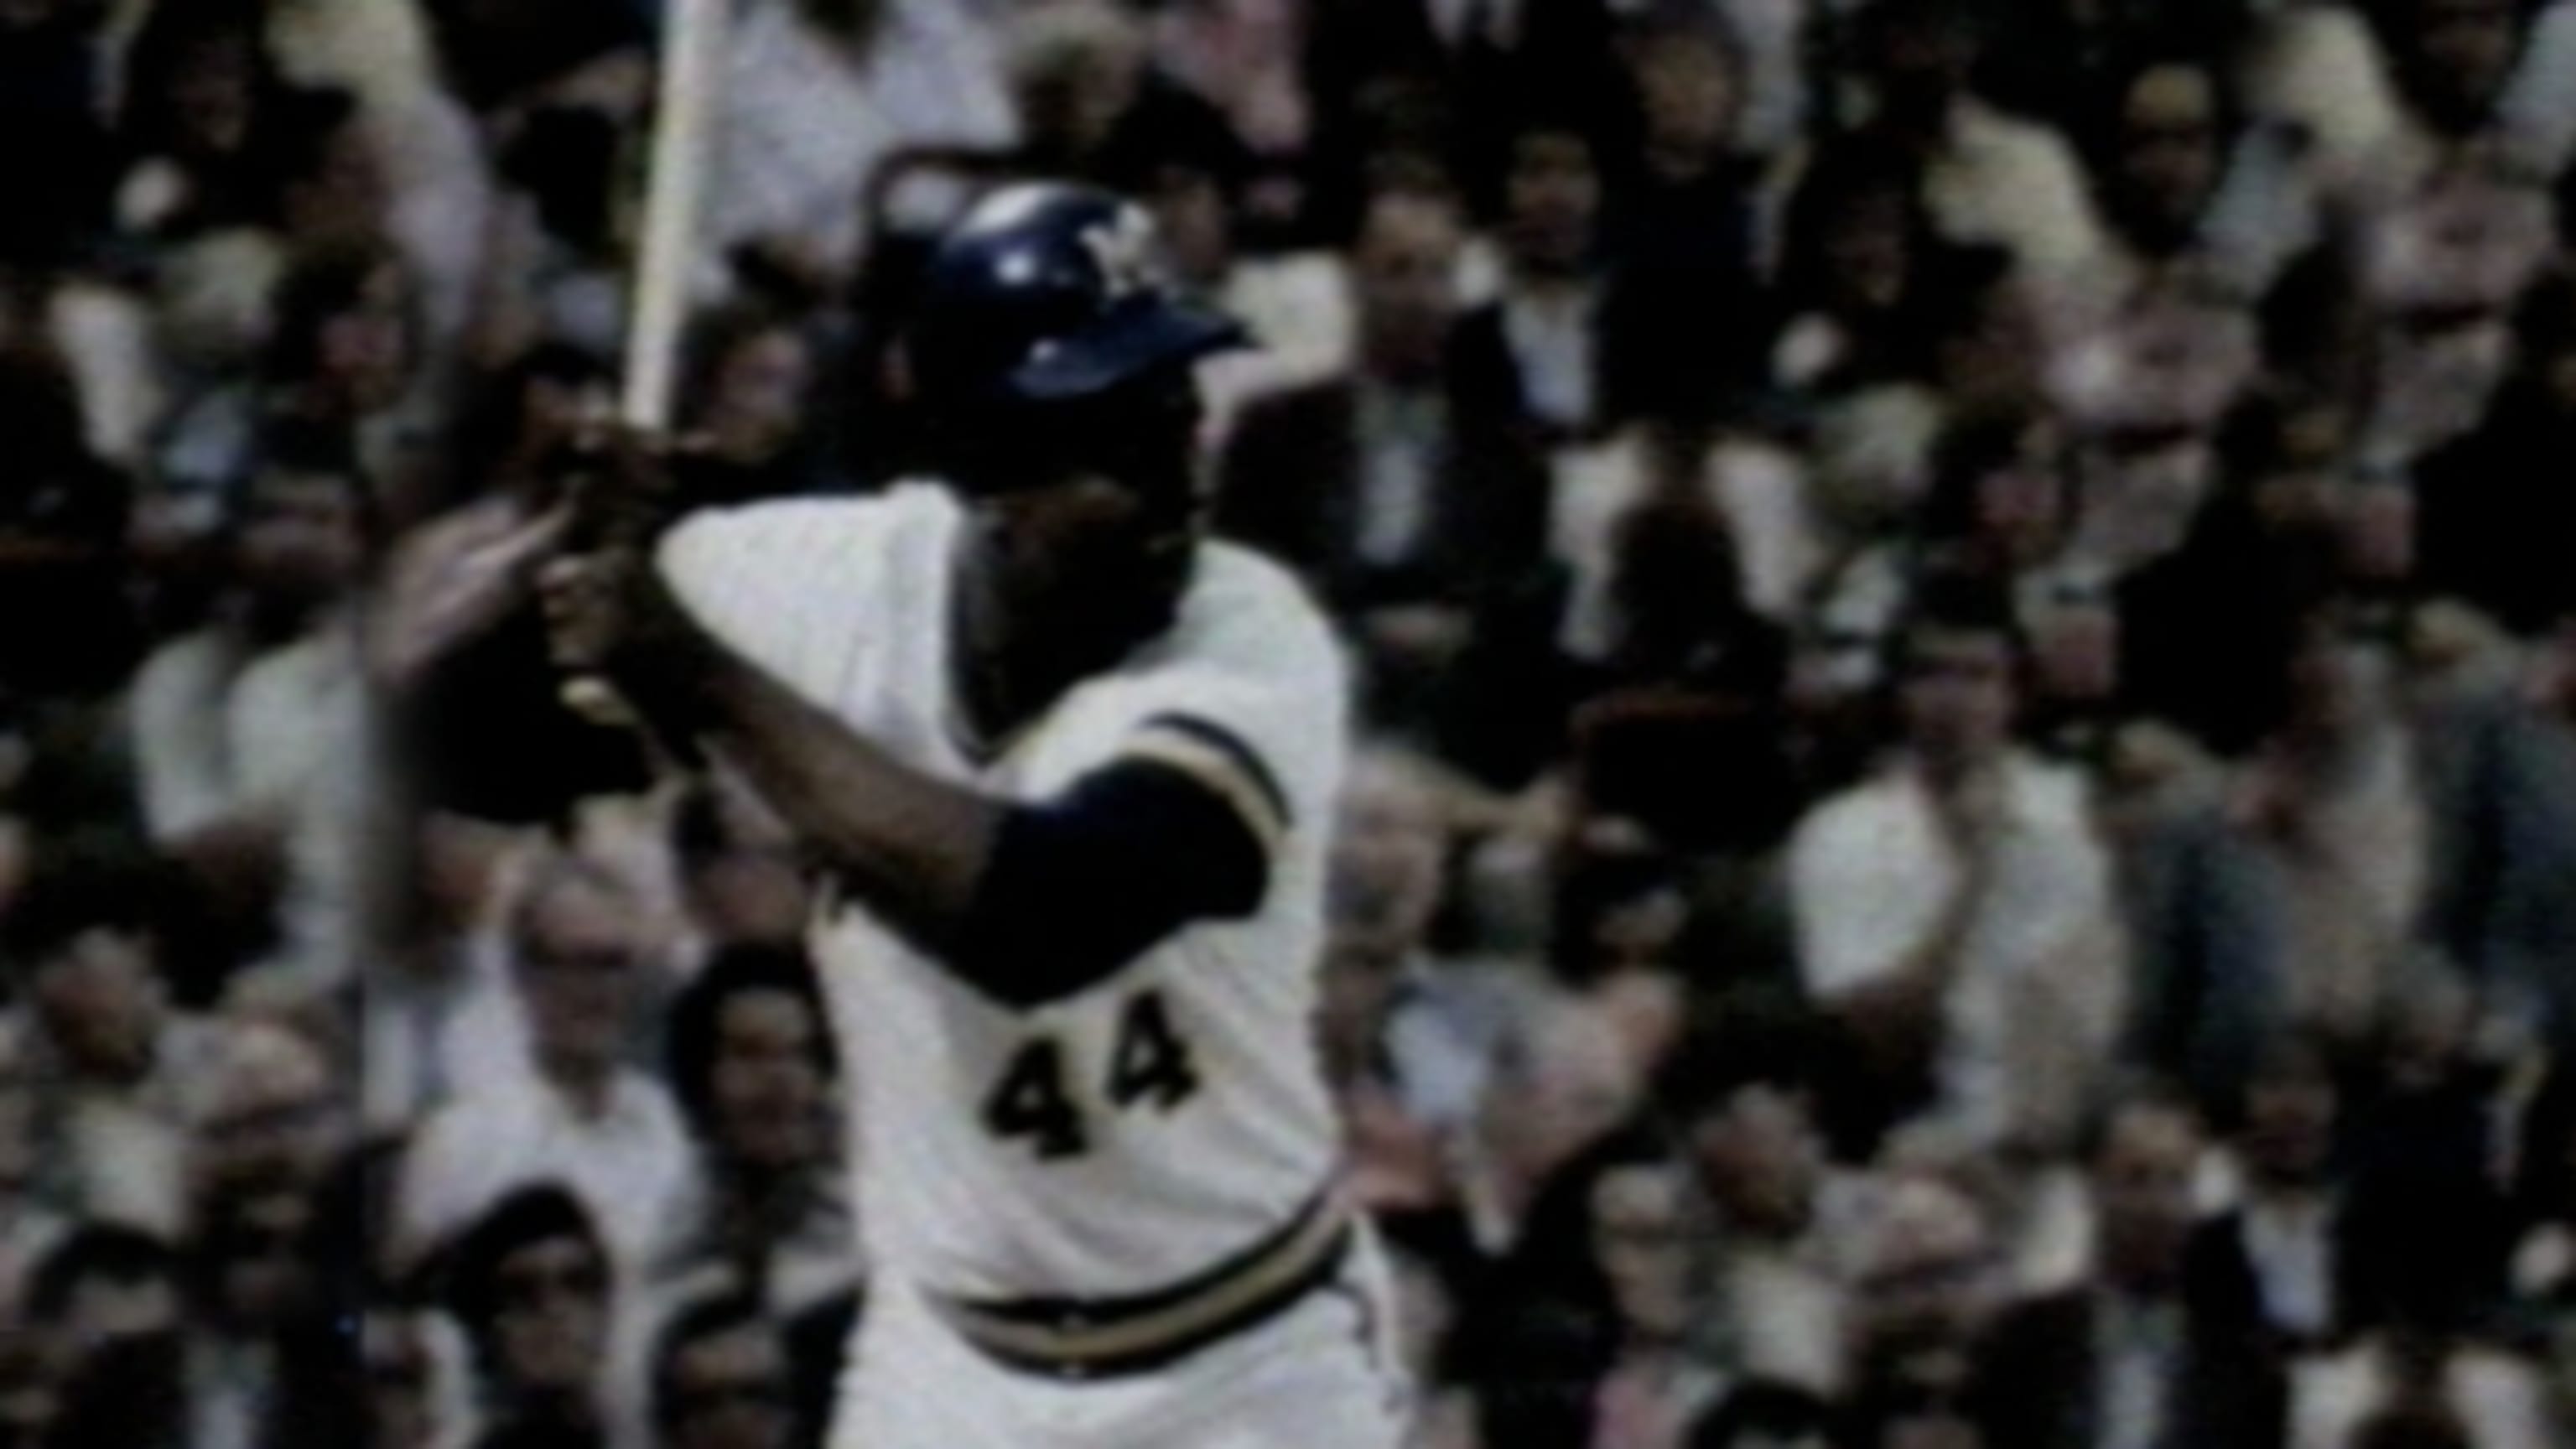 The Braves trade Hank Aaron to the Brewers